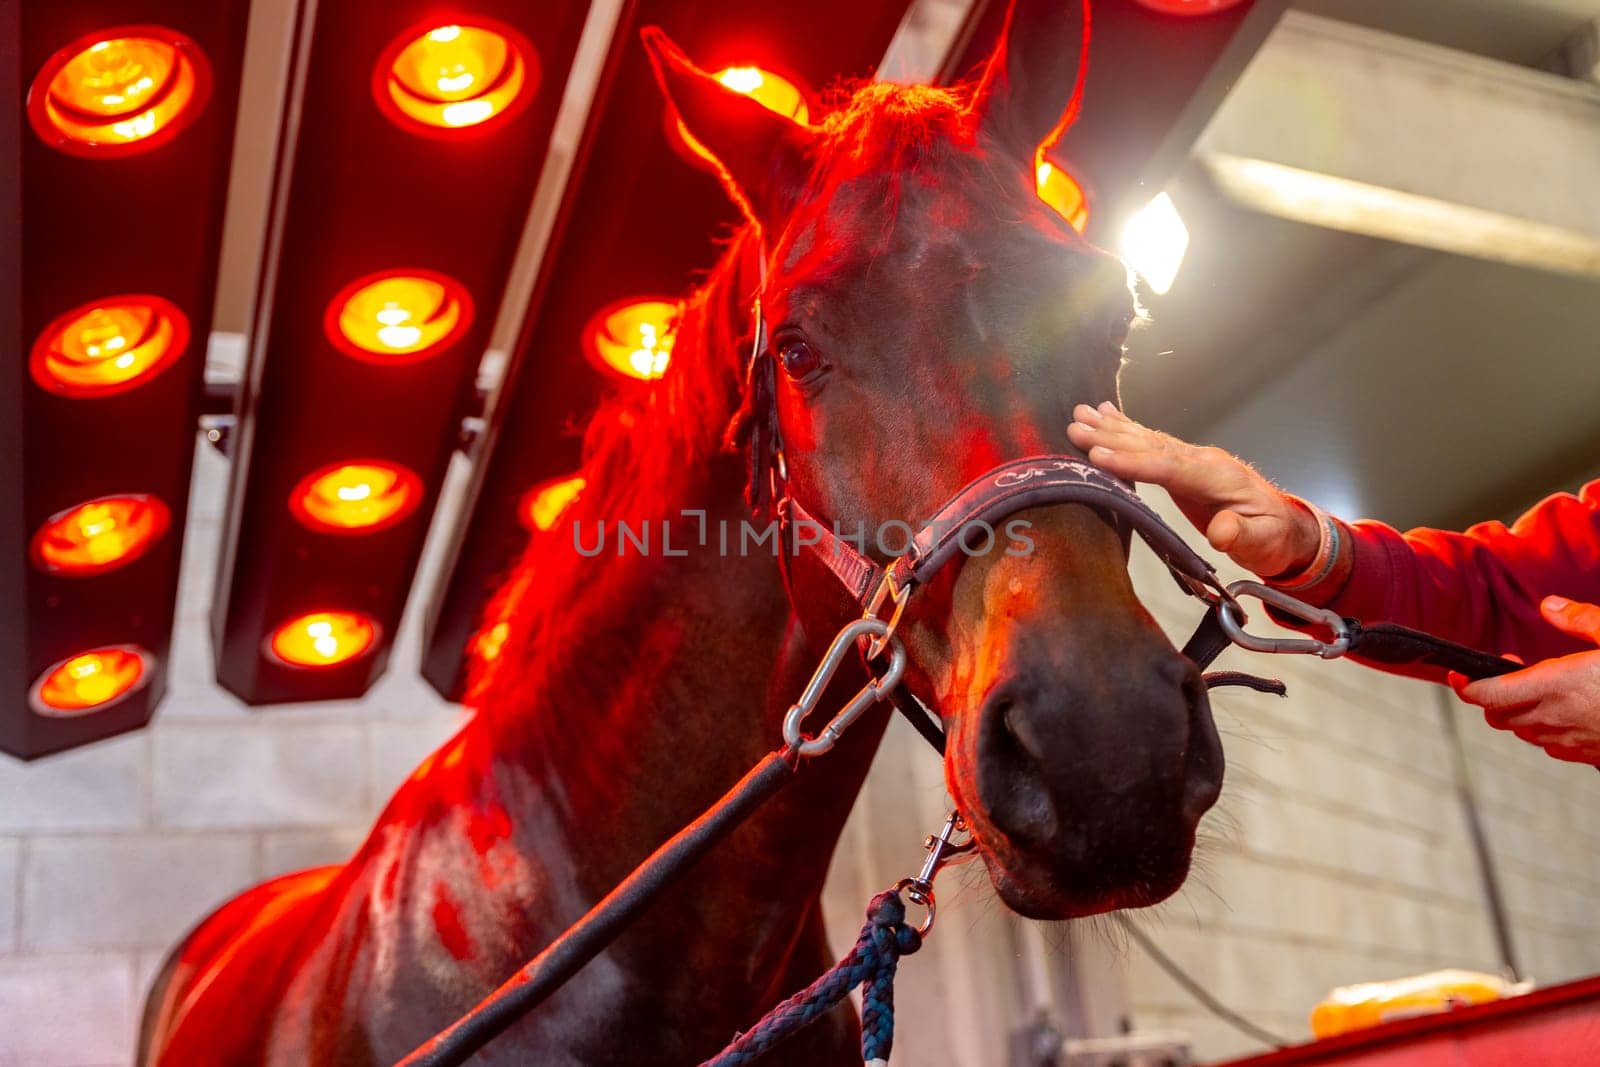 Close-up cropped photo of a person petting a horse during a warmth solarium